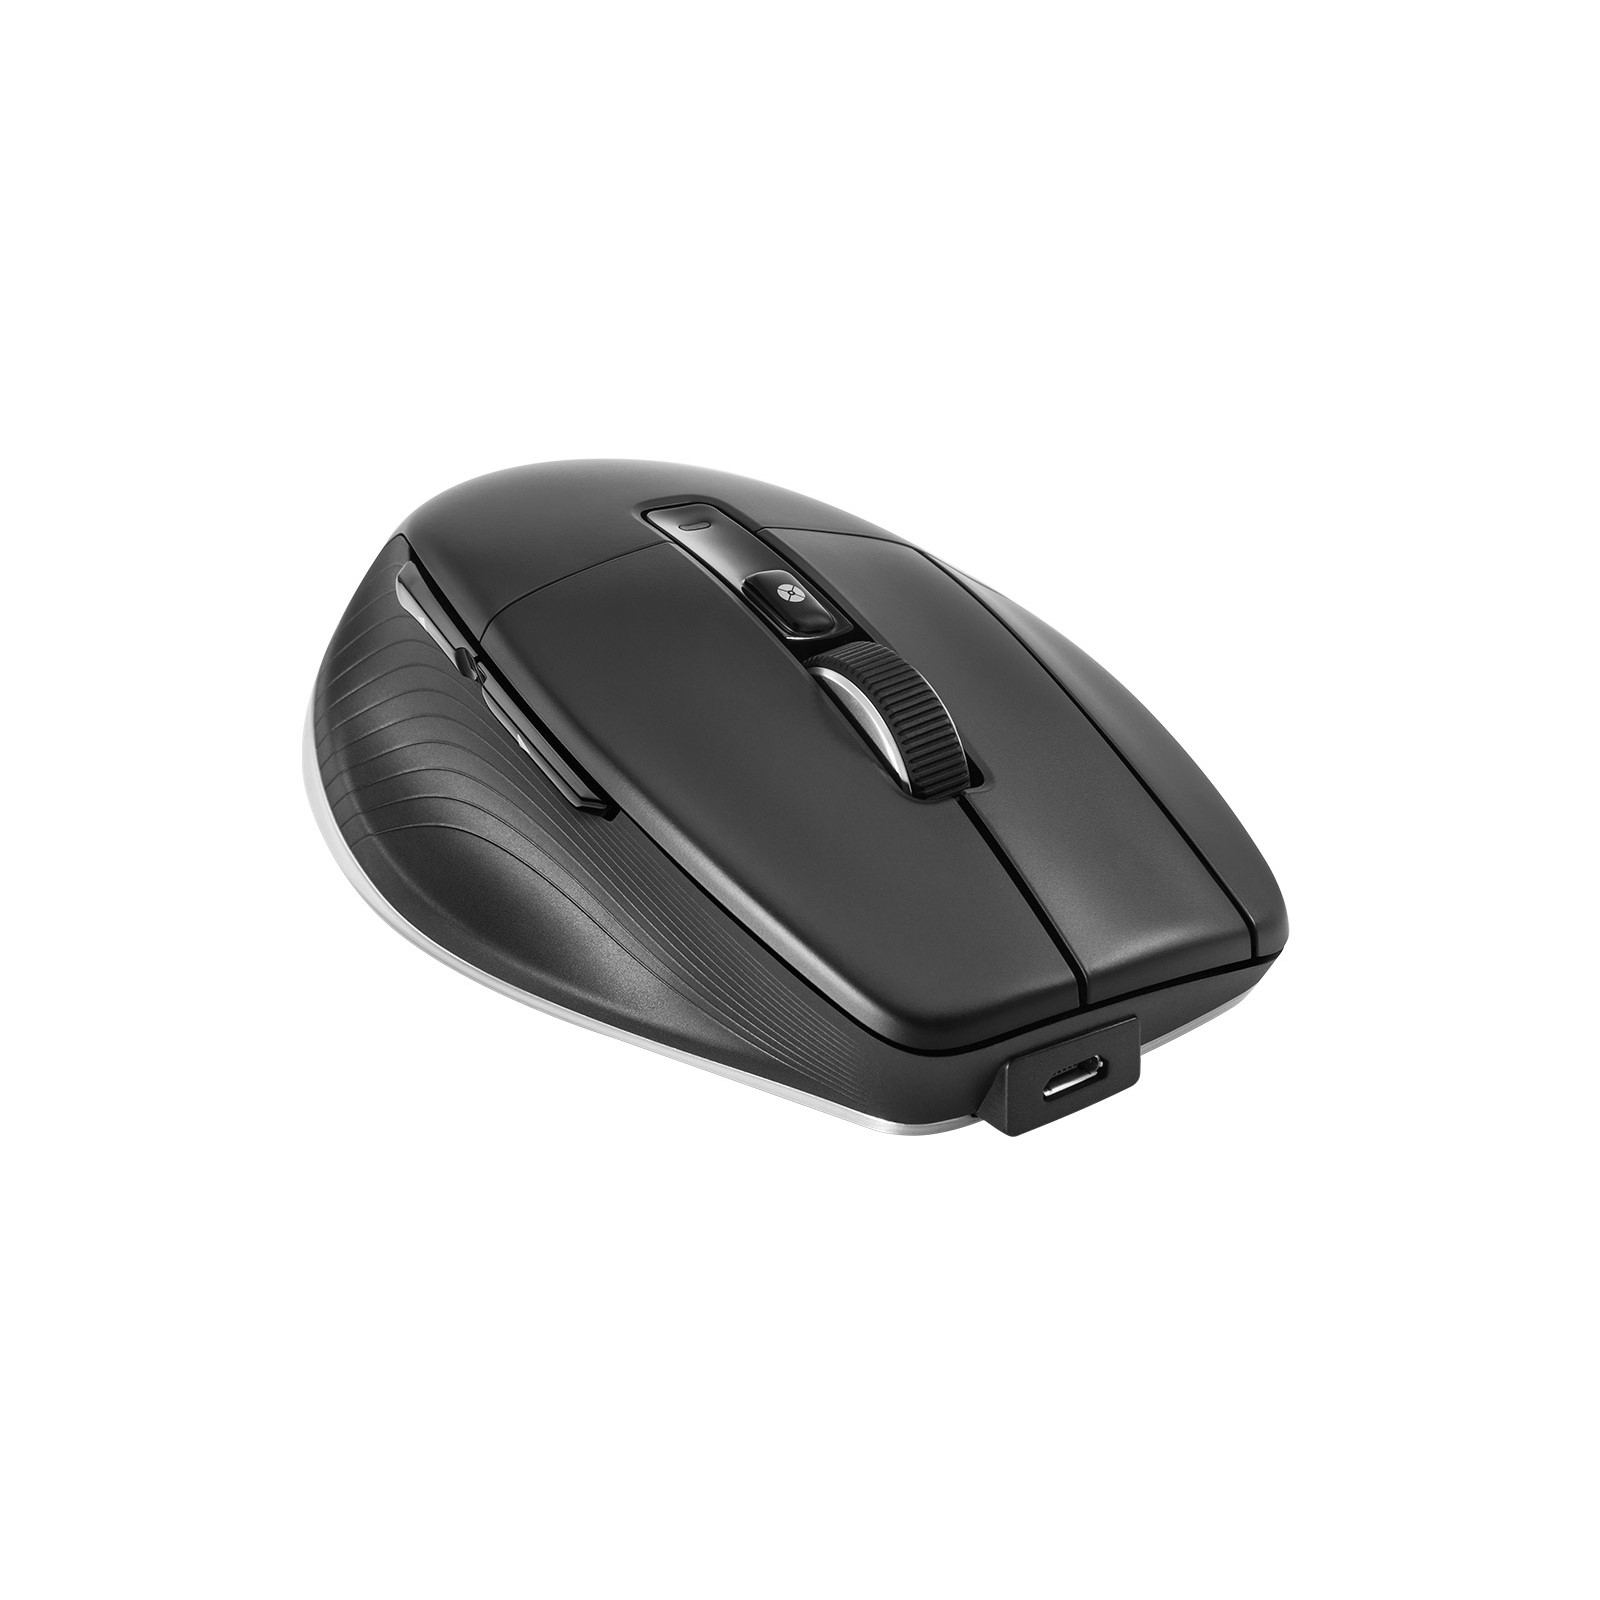 3dconnexion Cadmouse Pro Wireless Left Solidbox Empower Yourself